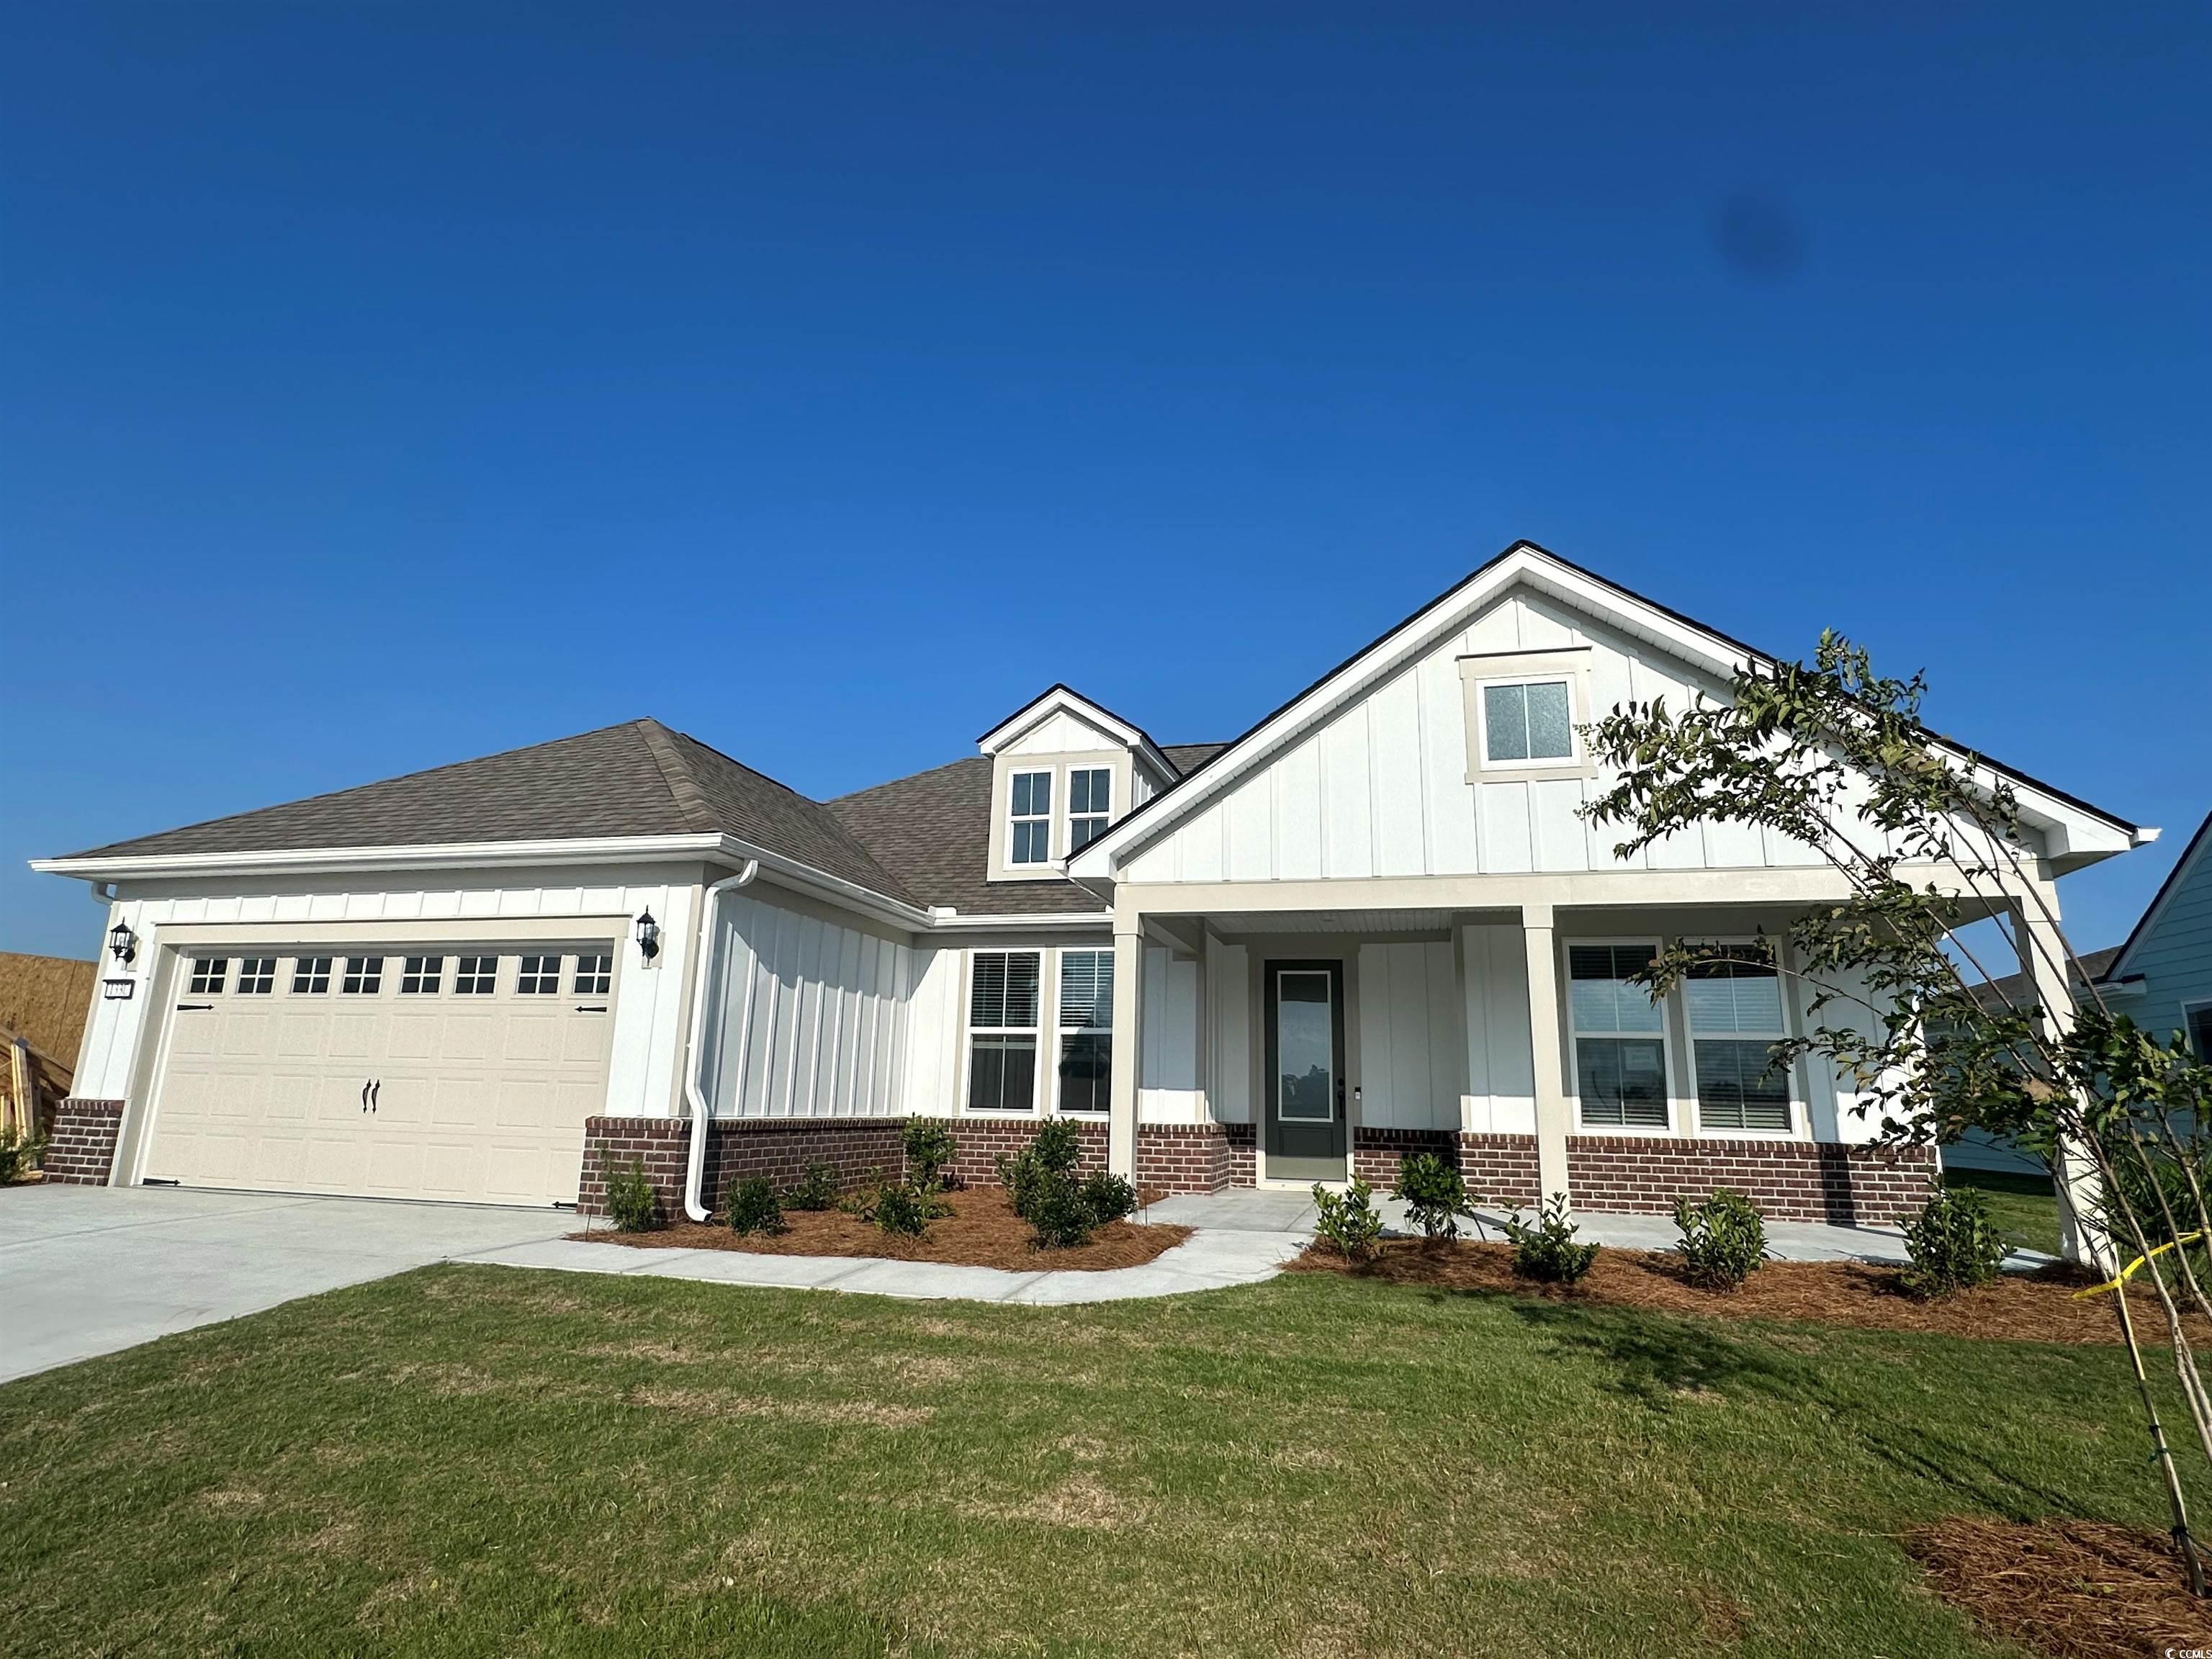 all new 55+ lifestyle community - selling now, ask about our quick, move-in ready homes.  age restricted, central north myrtle beach, just over a mile from the ocean, flood zone x.  golf cart friendly, pets/fences allowed.  amenities/clubhouse, yard care, high-speed internet and cable included in monthly hoa.  < 500 homes upon community completion, build to suit, choice of 10 customizable floorplans.  detached low-country, 1-2 story floorplans, owner's suites on first floor.  2 - 5 bedroom homes with 2-3 car garage options.  monthly events/activity calendar provided by full-time lifestyle director.  new amenity center/clubhouse opened july 2023.  includes indoor lap pool/locker rooms, outdoor salt water pool/2 hot tubs, 8 pickleball courts, fully equipped fitness center, bocce courts, putting green and 5 foot sidewalks both sides of the street throughout the community! < 5 minutes to city community center, sports complex, aquatics & fitness center and crescent beach public beach access.  dog park, marinas, rv parks/storage, golf courses, dining, grocery, medical facilities and more within 15 minutes.   myrtle beach international airport < 30 minutes away!  you cannot beat this location!